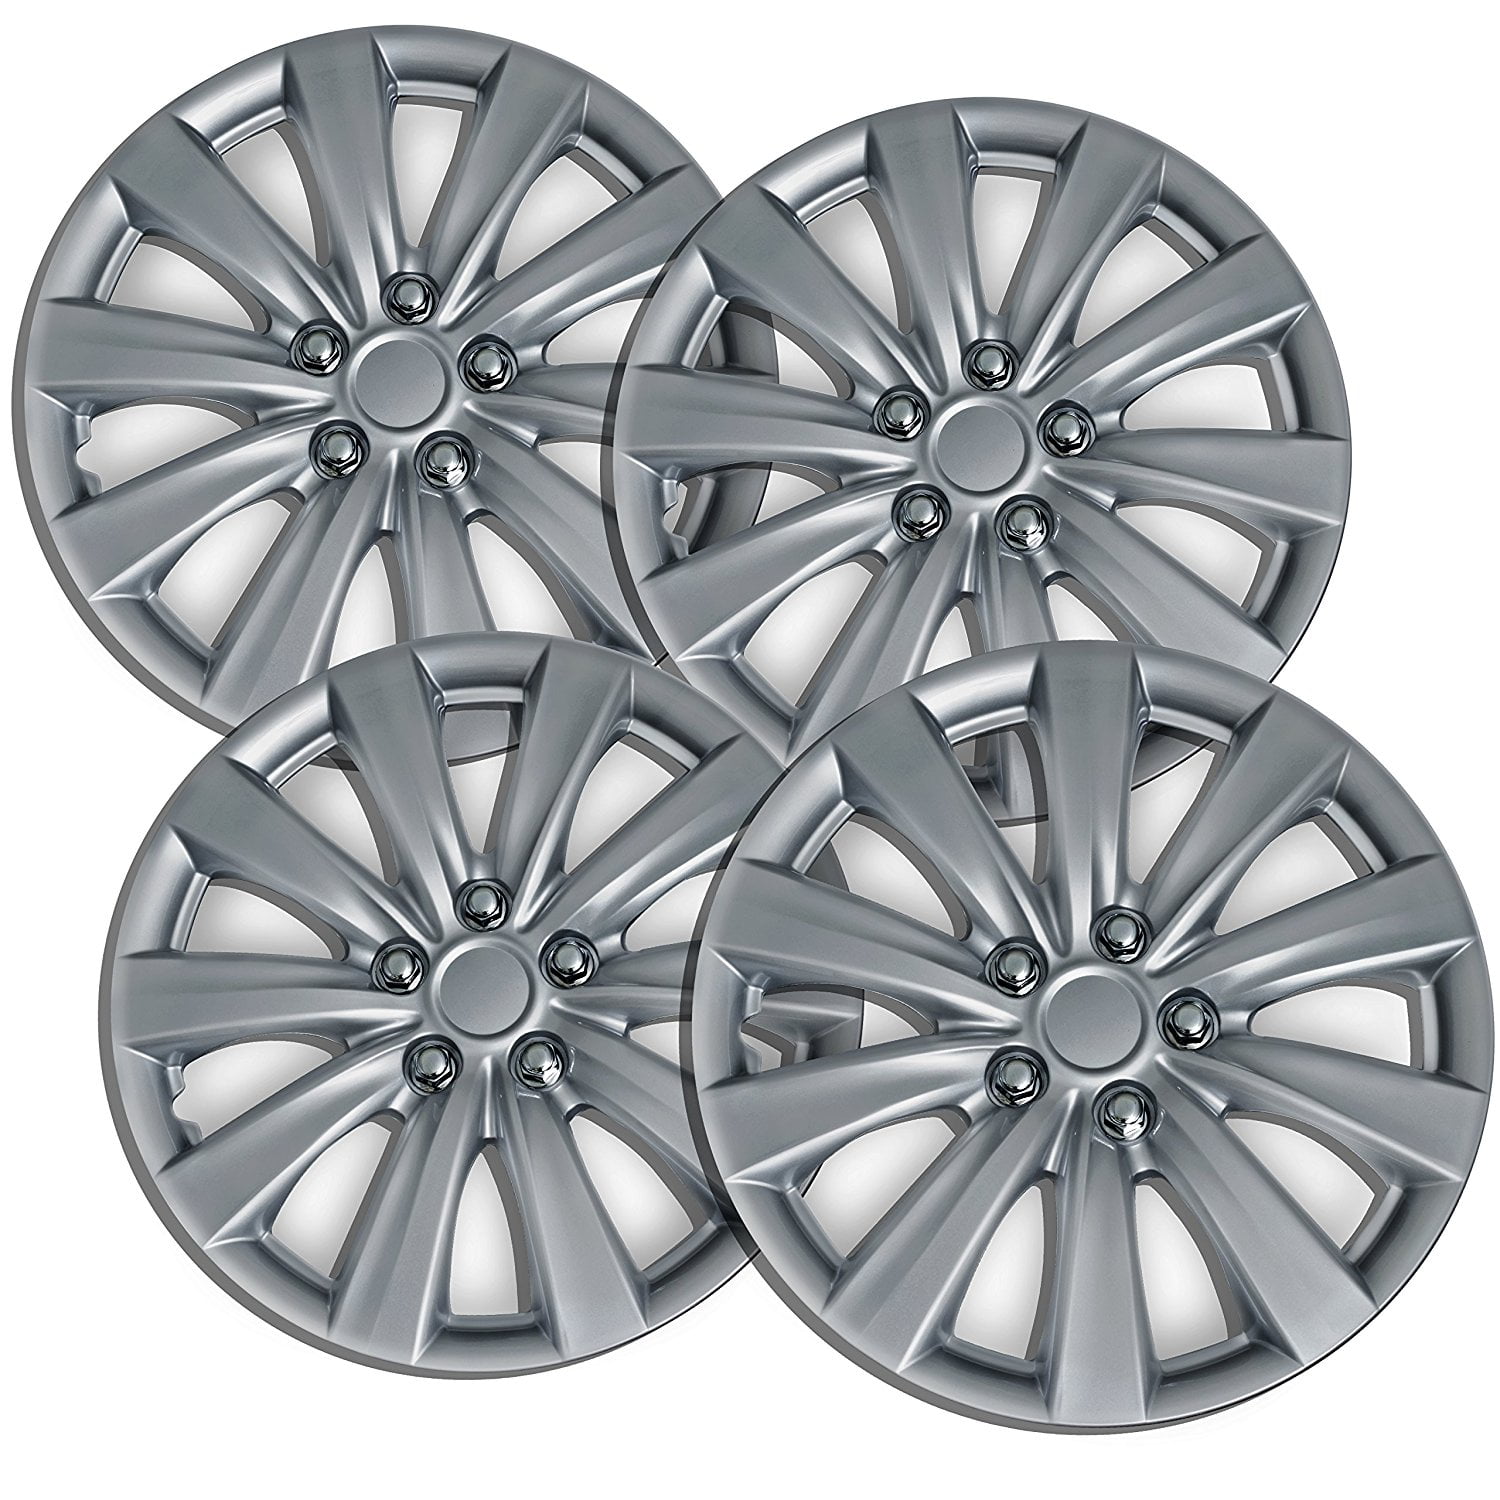 4 Pack 16 Inch Sporty Silver Hubcaps OEM Replacement Car Wheel Covers 